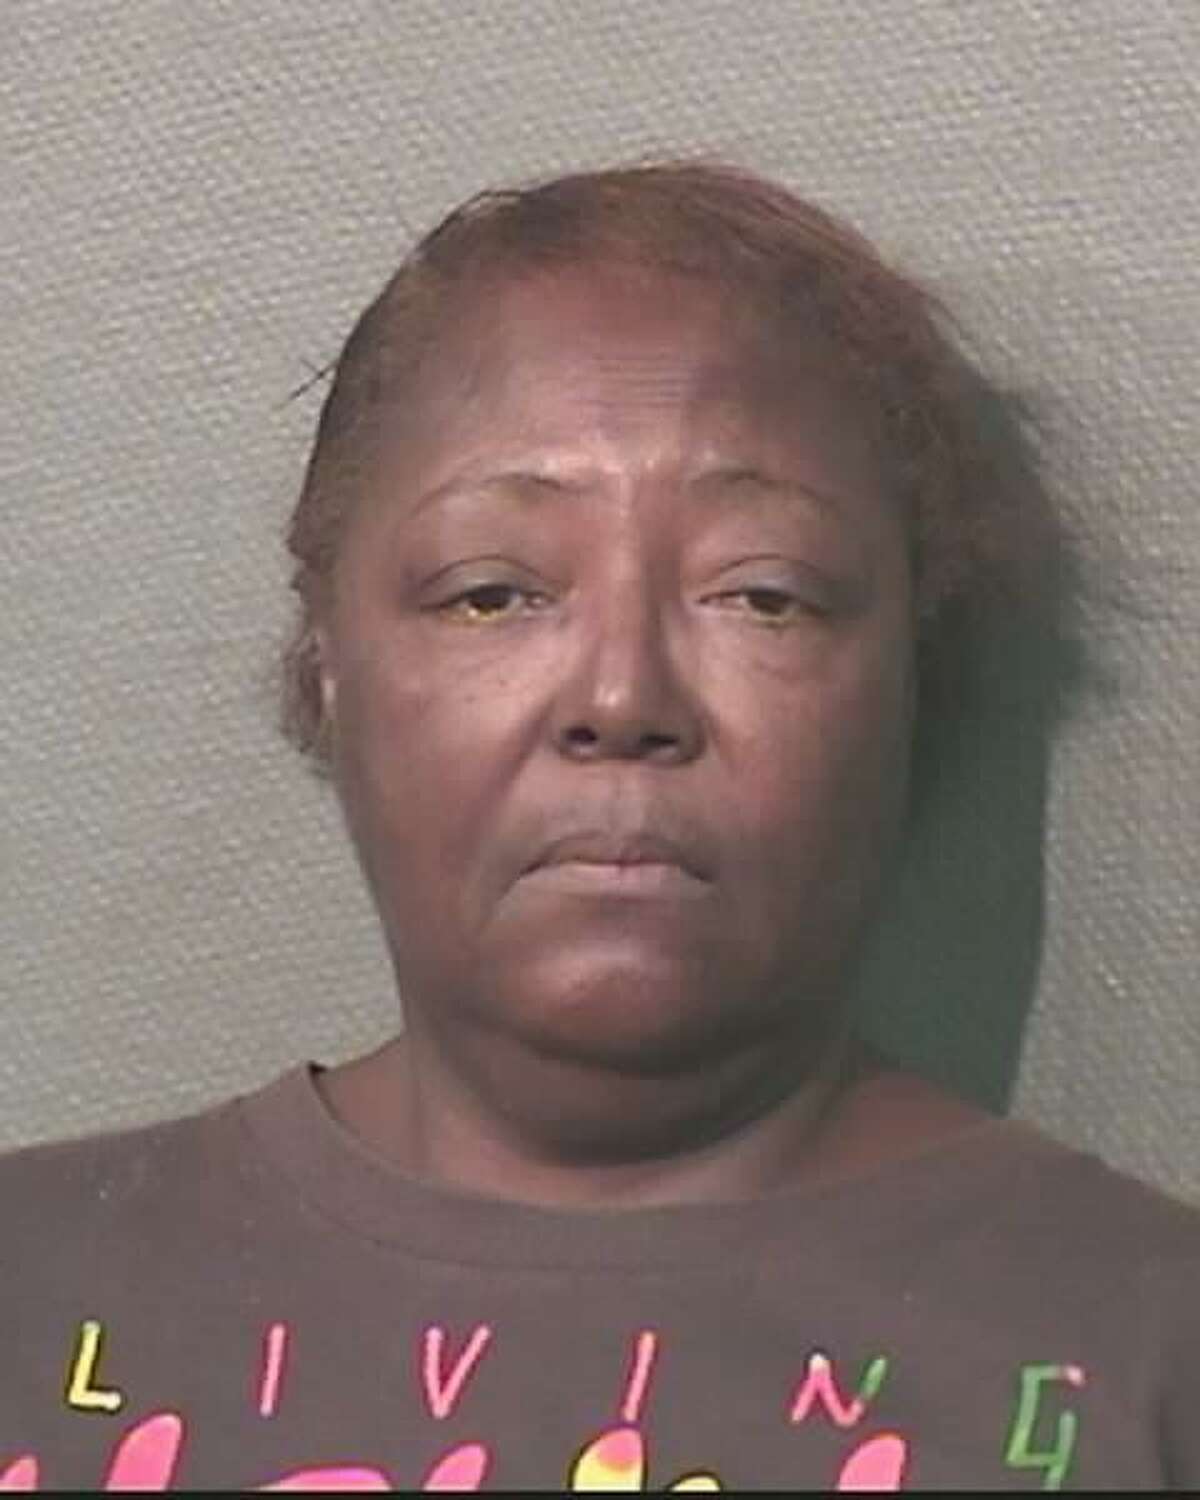 Sheila Smith, is wanted by Houston Crime Stoppers on a charge of aggravated assault with a deadly weapon.